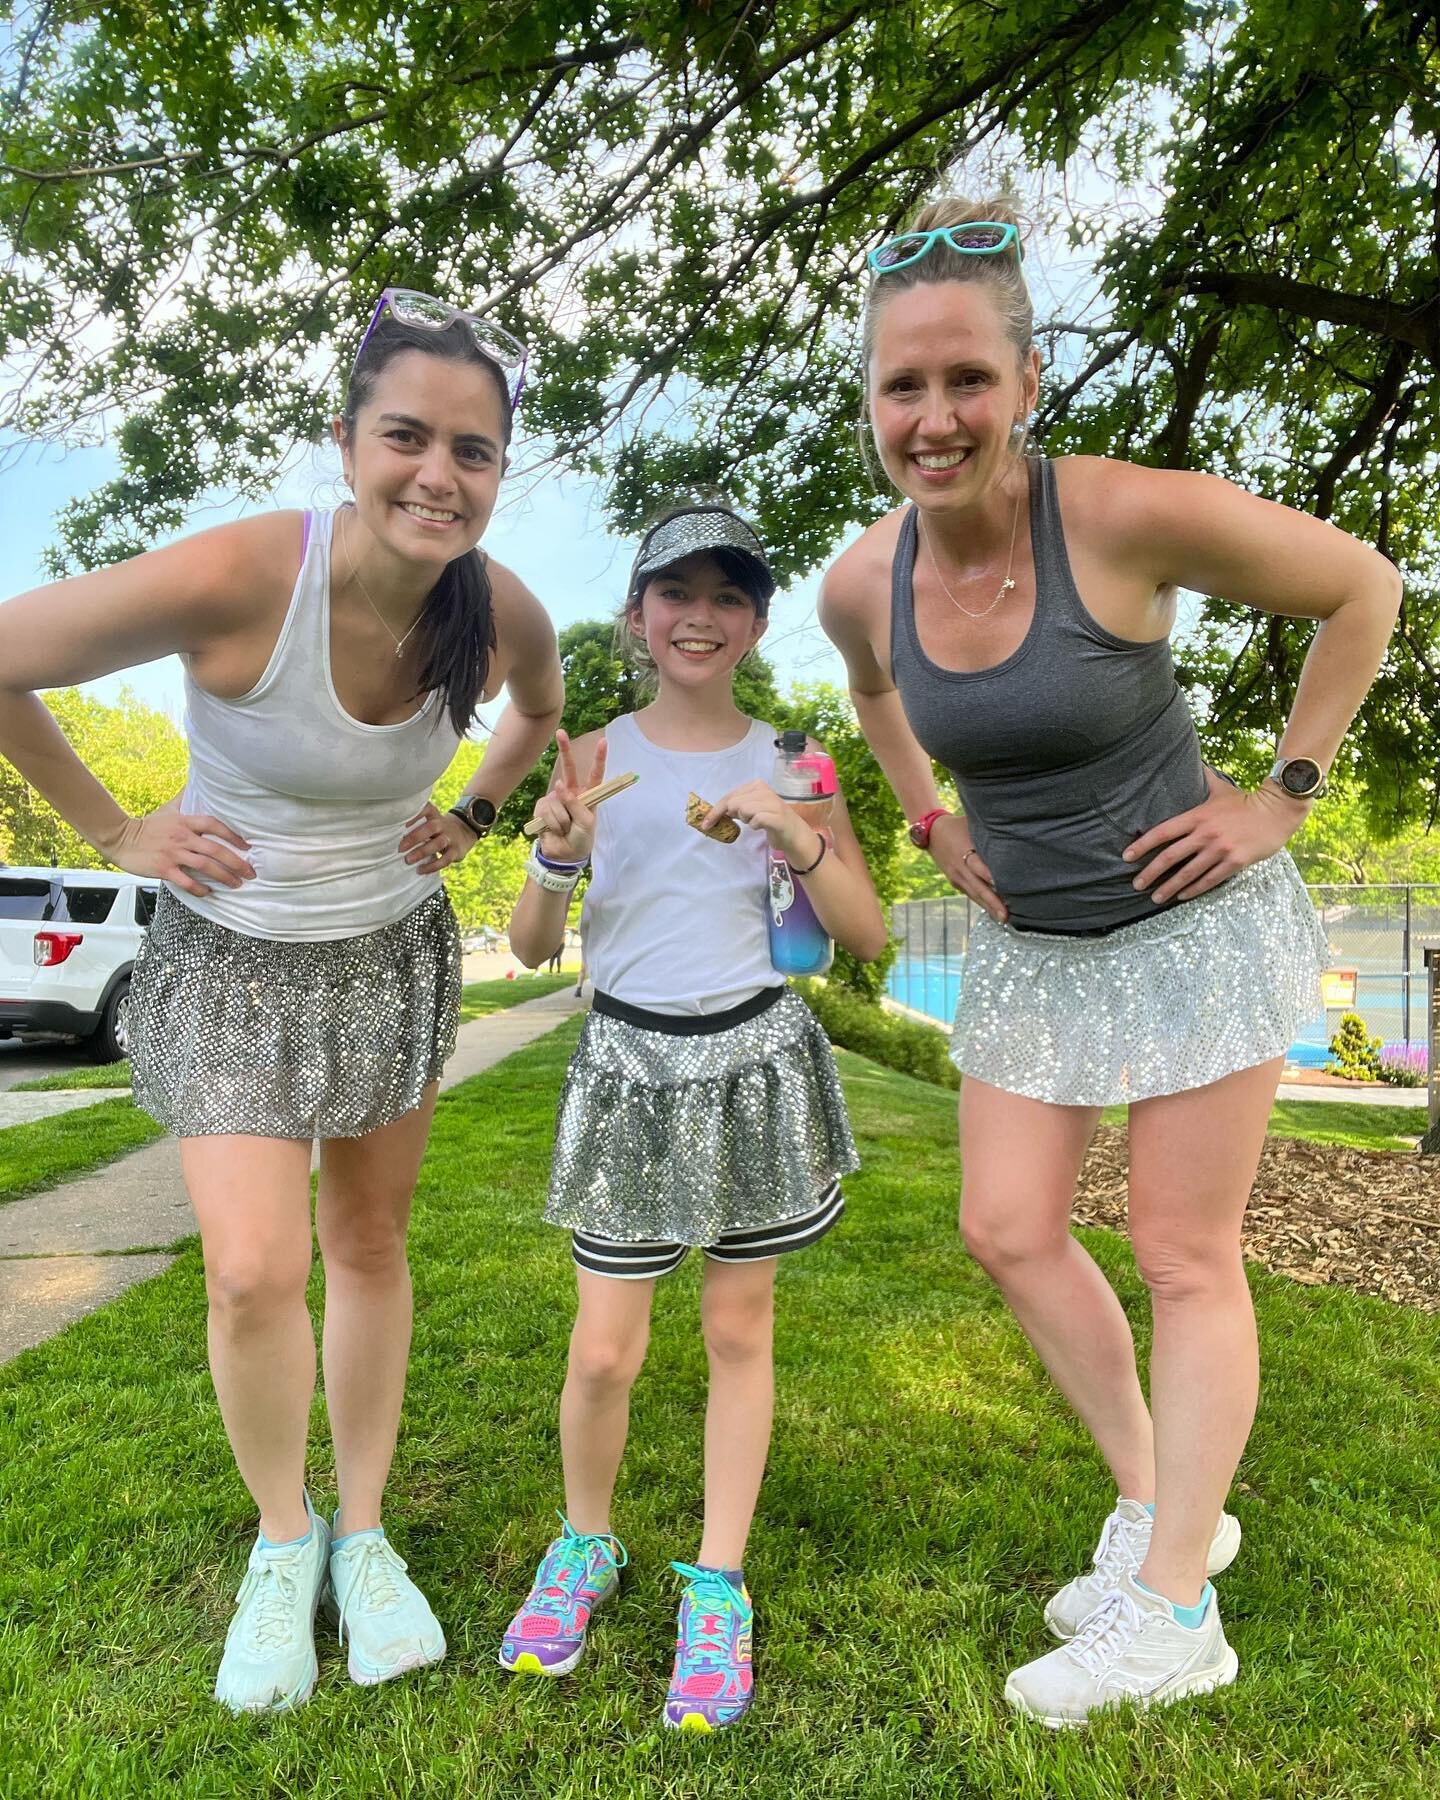 We slept in this morning and joined Lila for her #GirlsOnTheRun practice 5k this afternoon! 

She freaking crushed it! We started with :30/:30 intervals and switched down to :15/:30, getting FASTER as we went on!! Lila is going to ROCK her race!! 

#